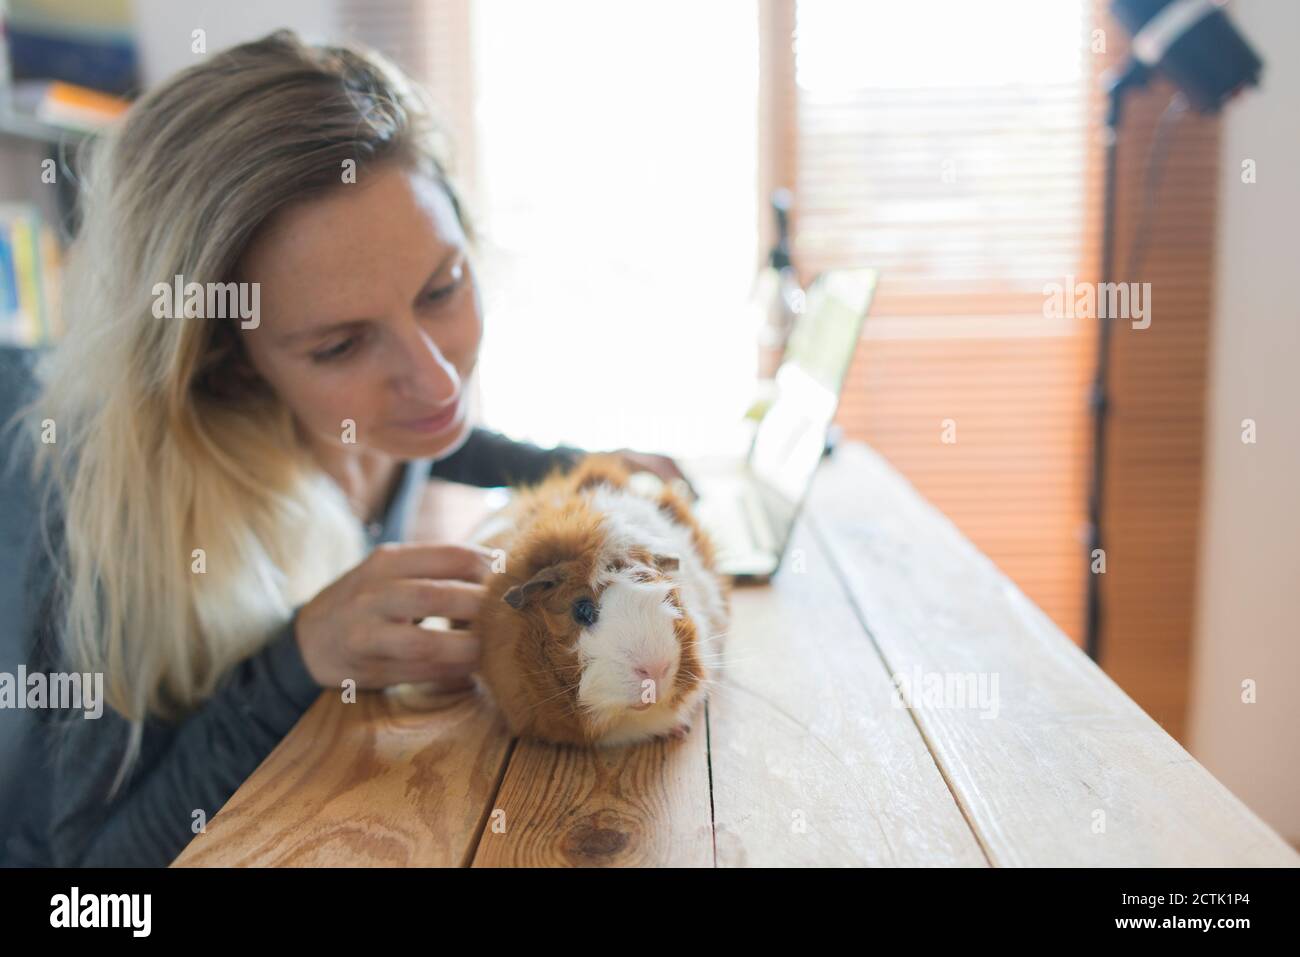 Blond woman stroking guinea pig while sitting with laptop at table Stock Photo